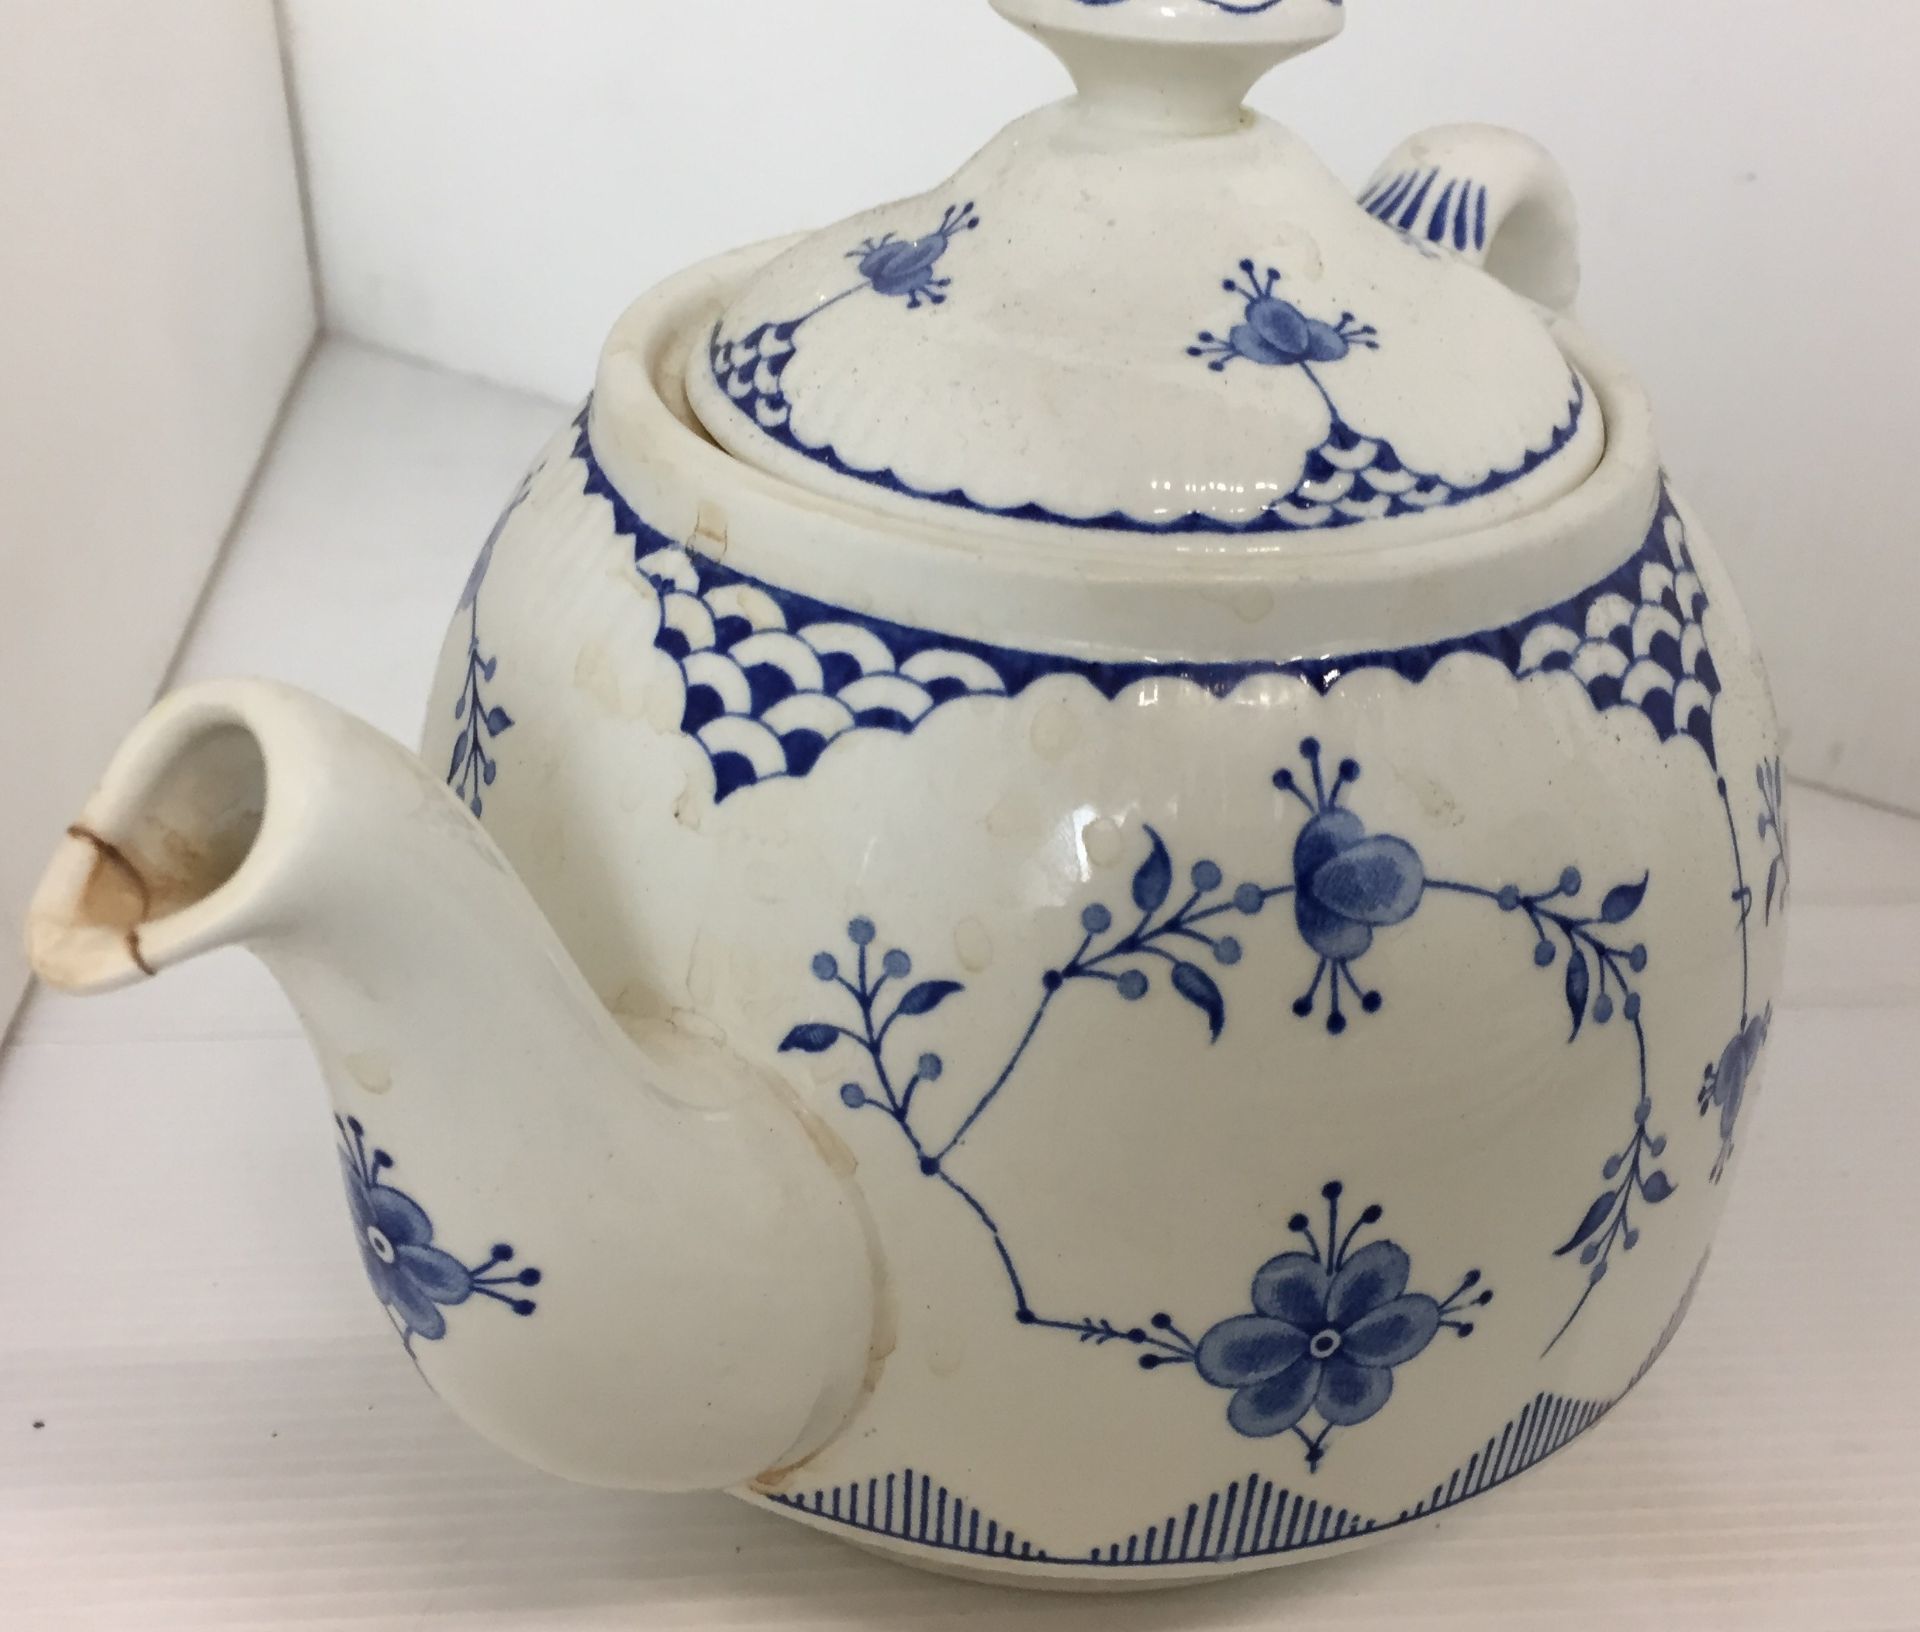 Twenty nine pieces of Masons and Furnivals Denmark blue and white tea service including teapot - Image 2 of 4